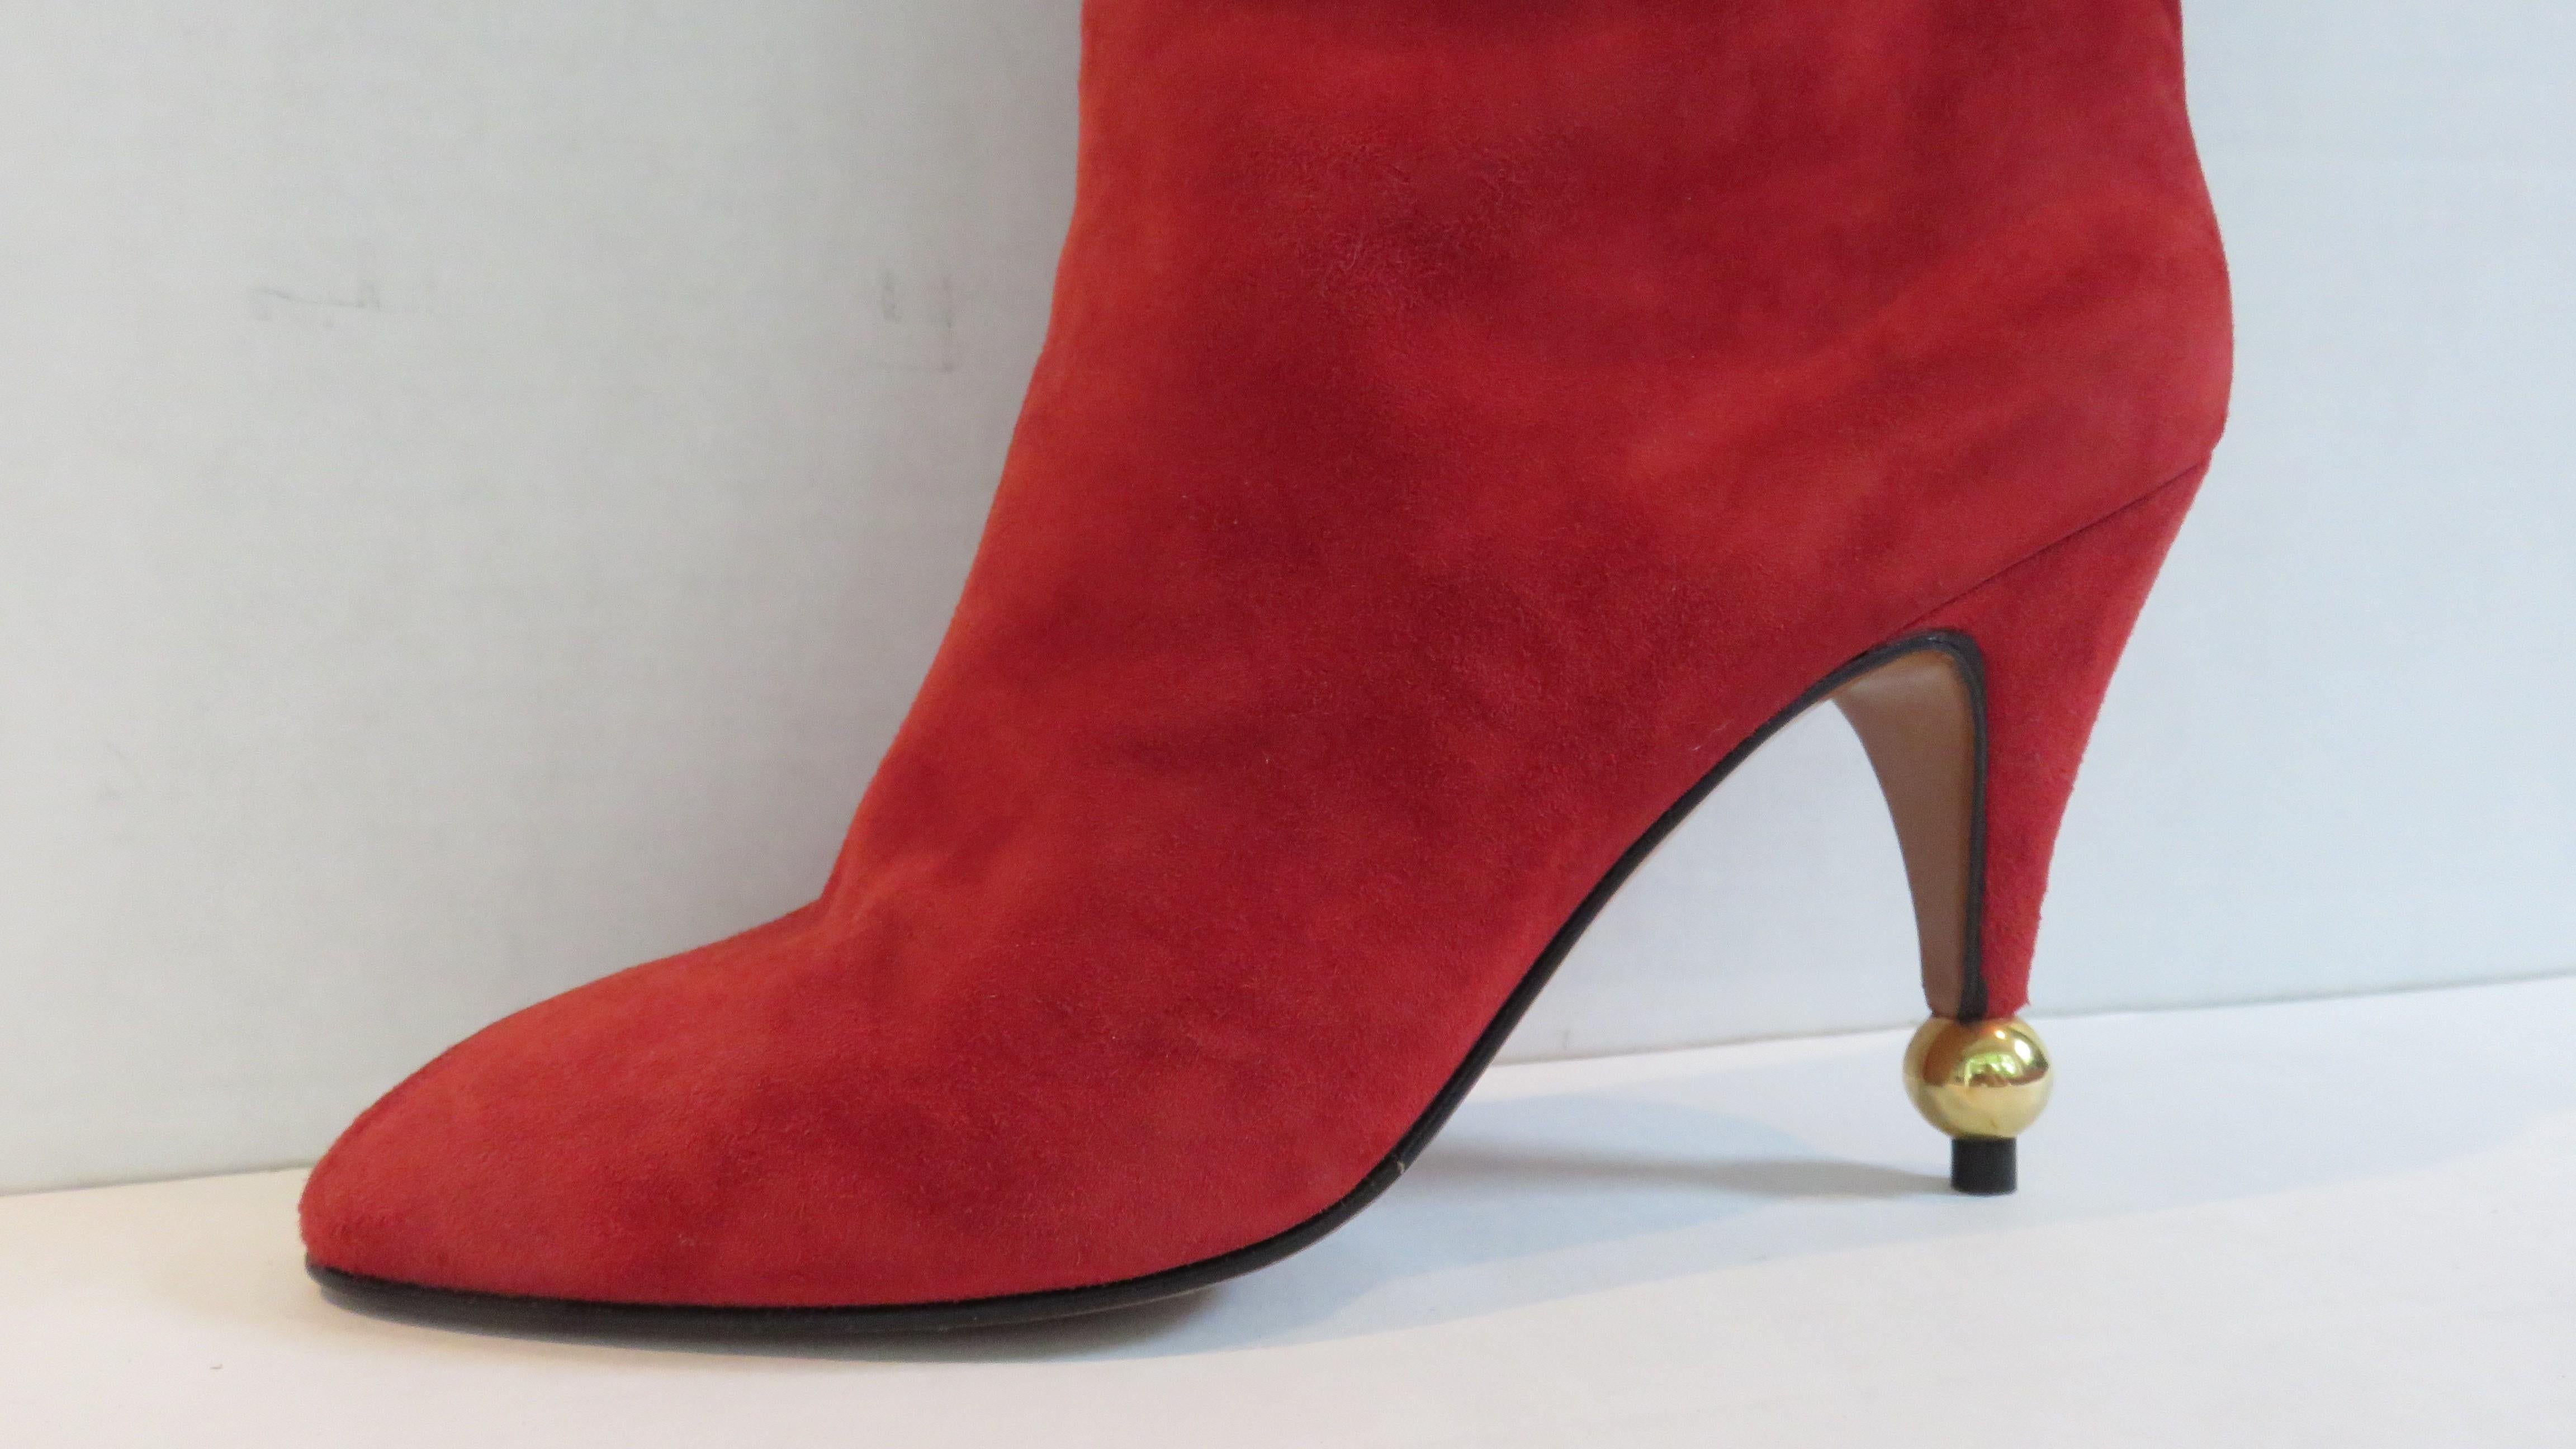 Gorgeous red suede boot by Roger Vivier from his original ball heel collection in the 1980s. They have a straight 13